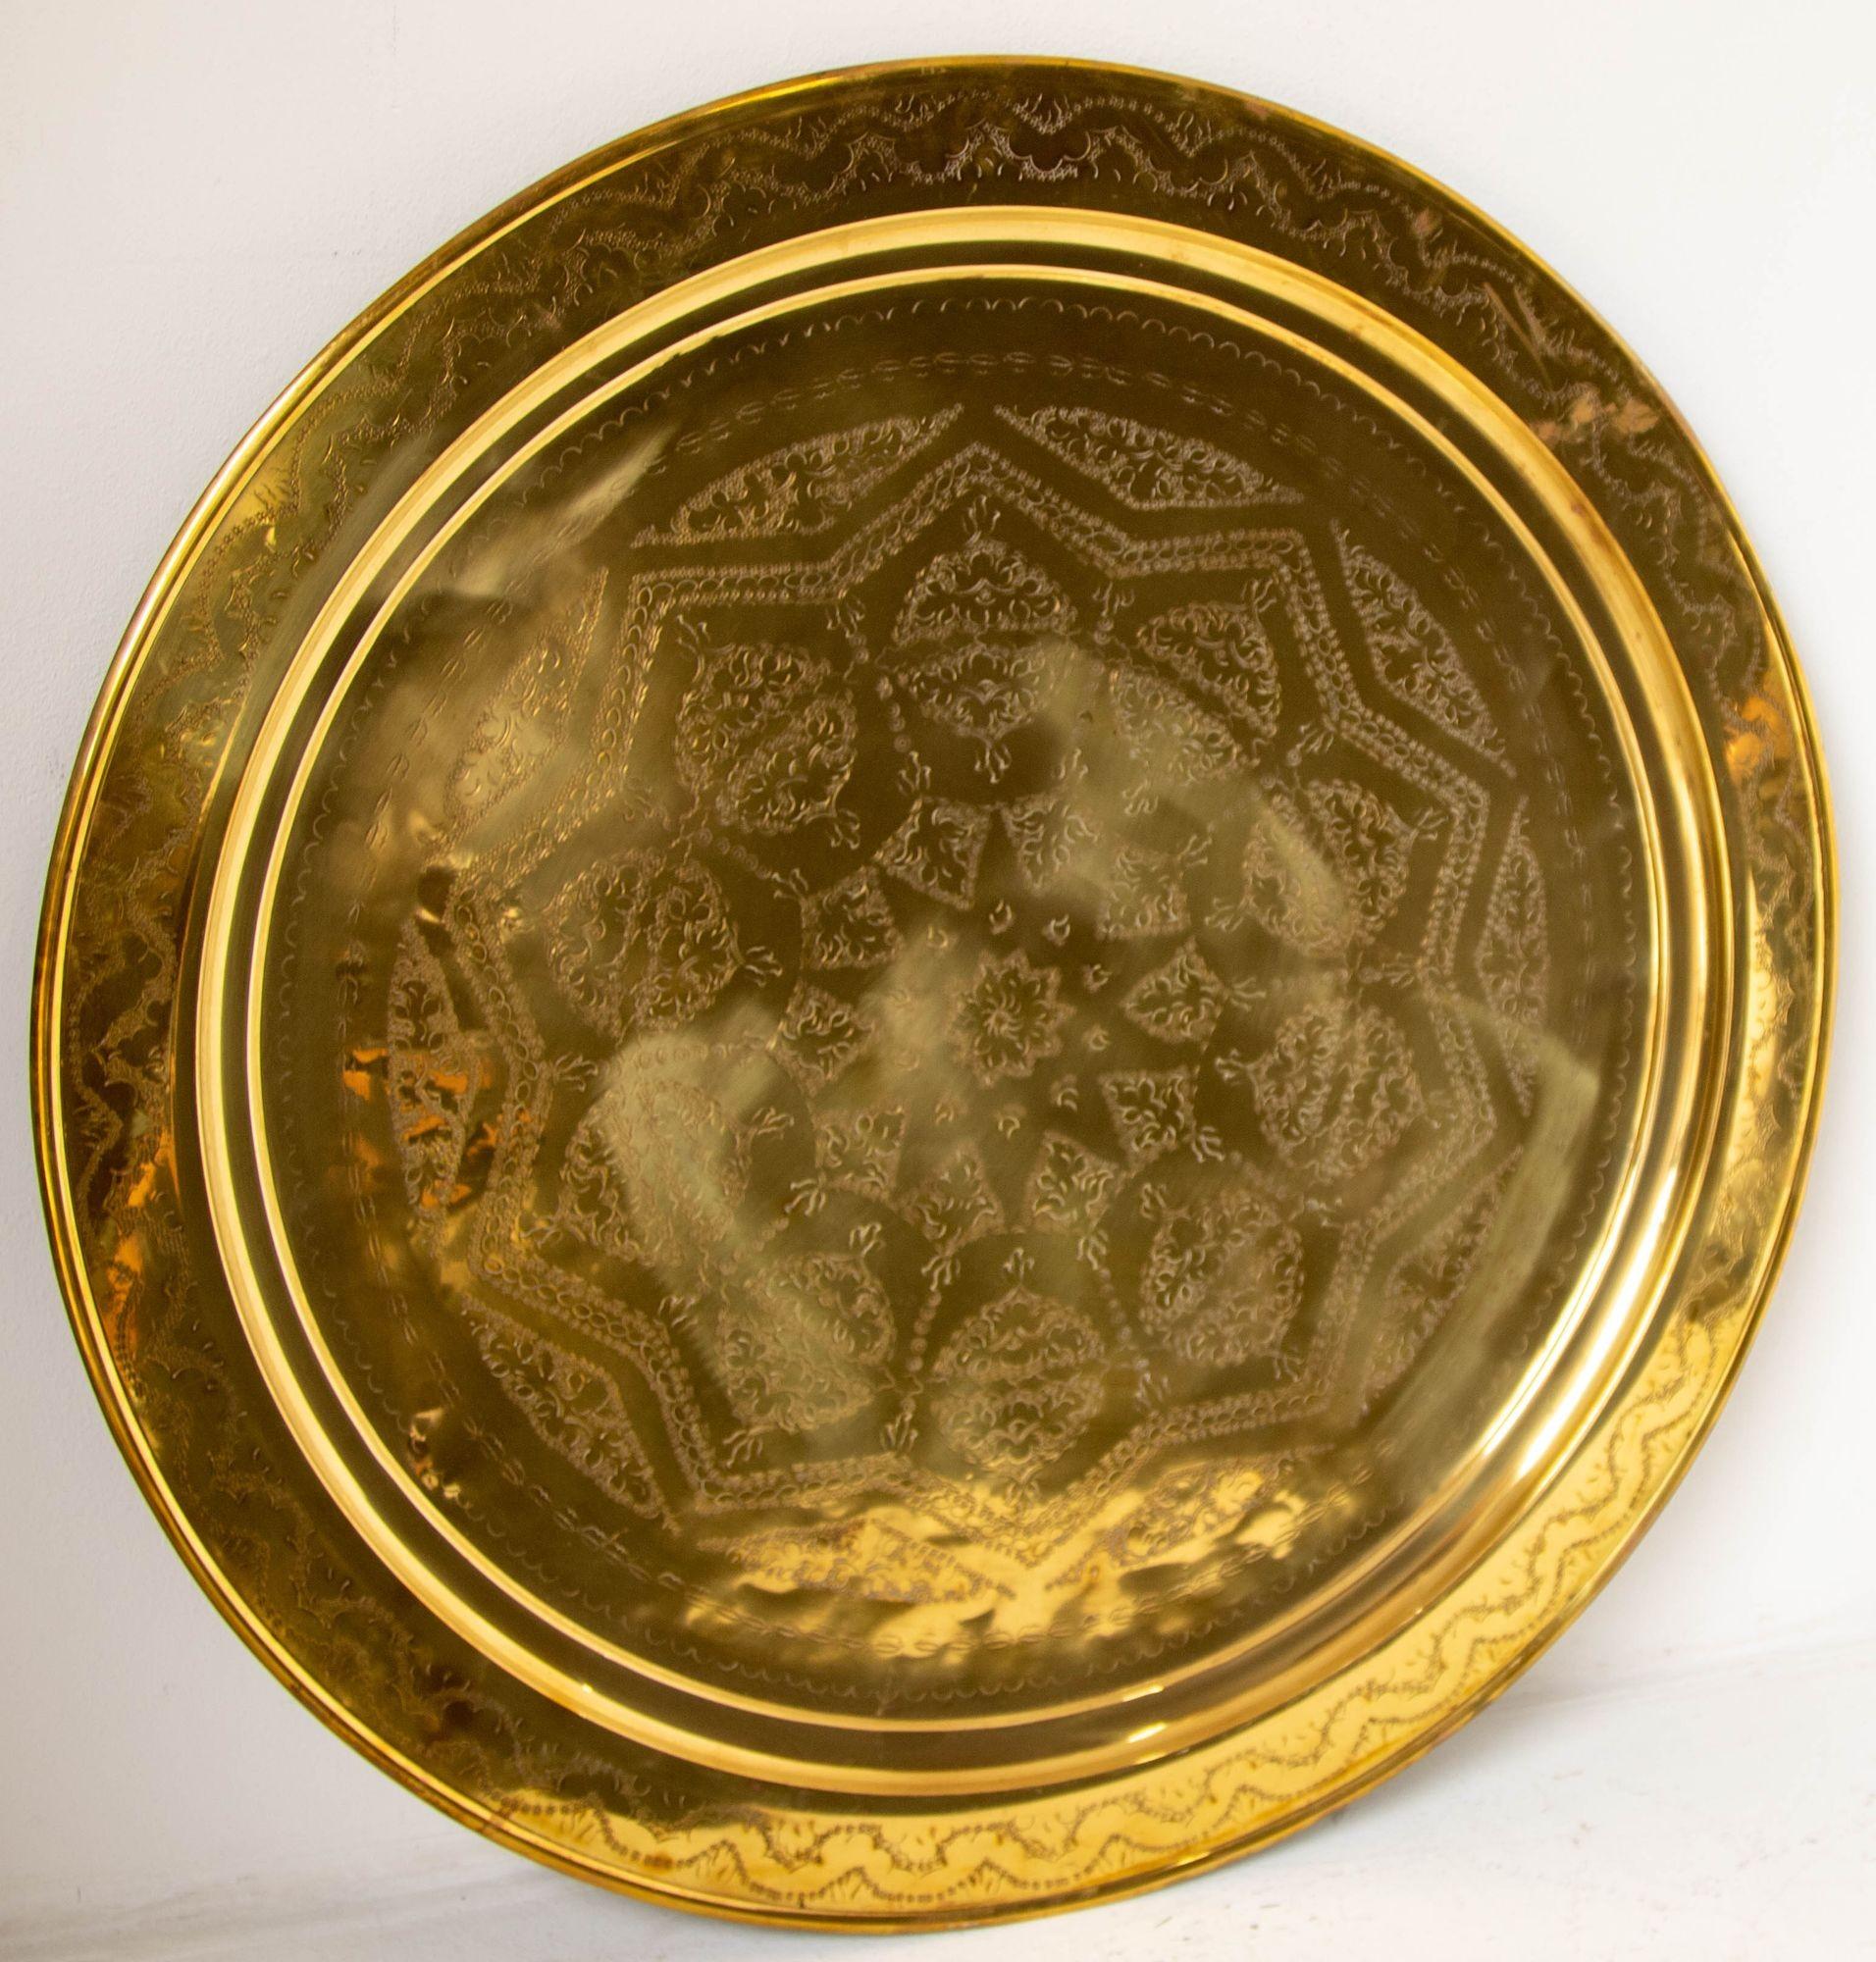 Antique Oversized Round Moroccan Polished Brass Tray Platter 19th C. For Sale 1